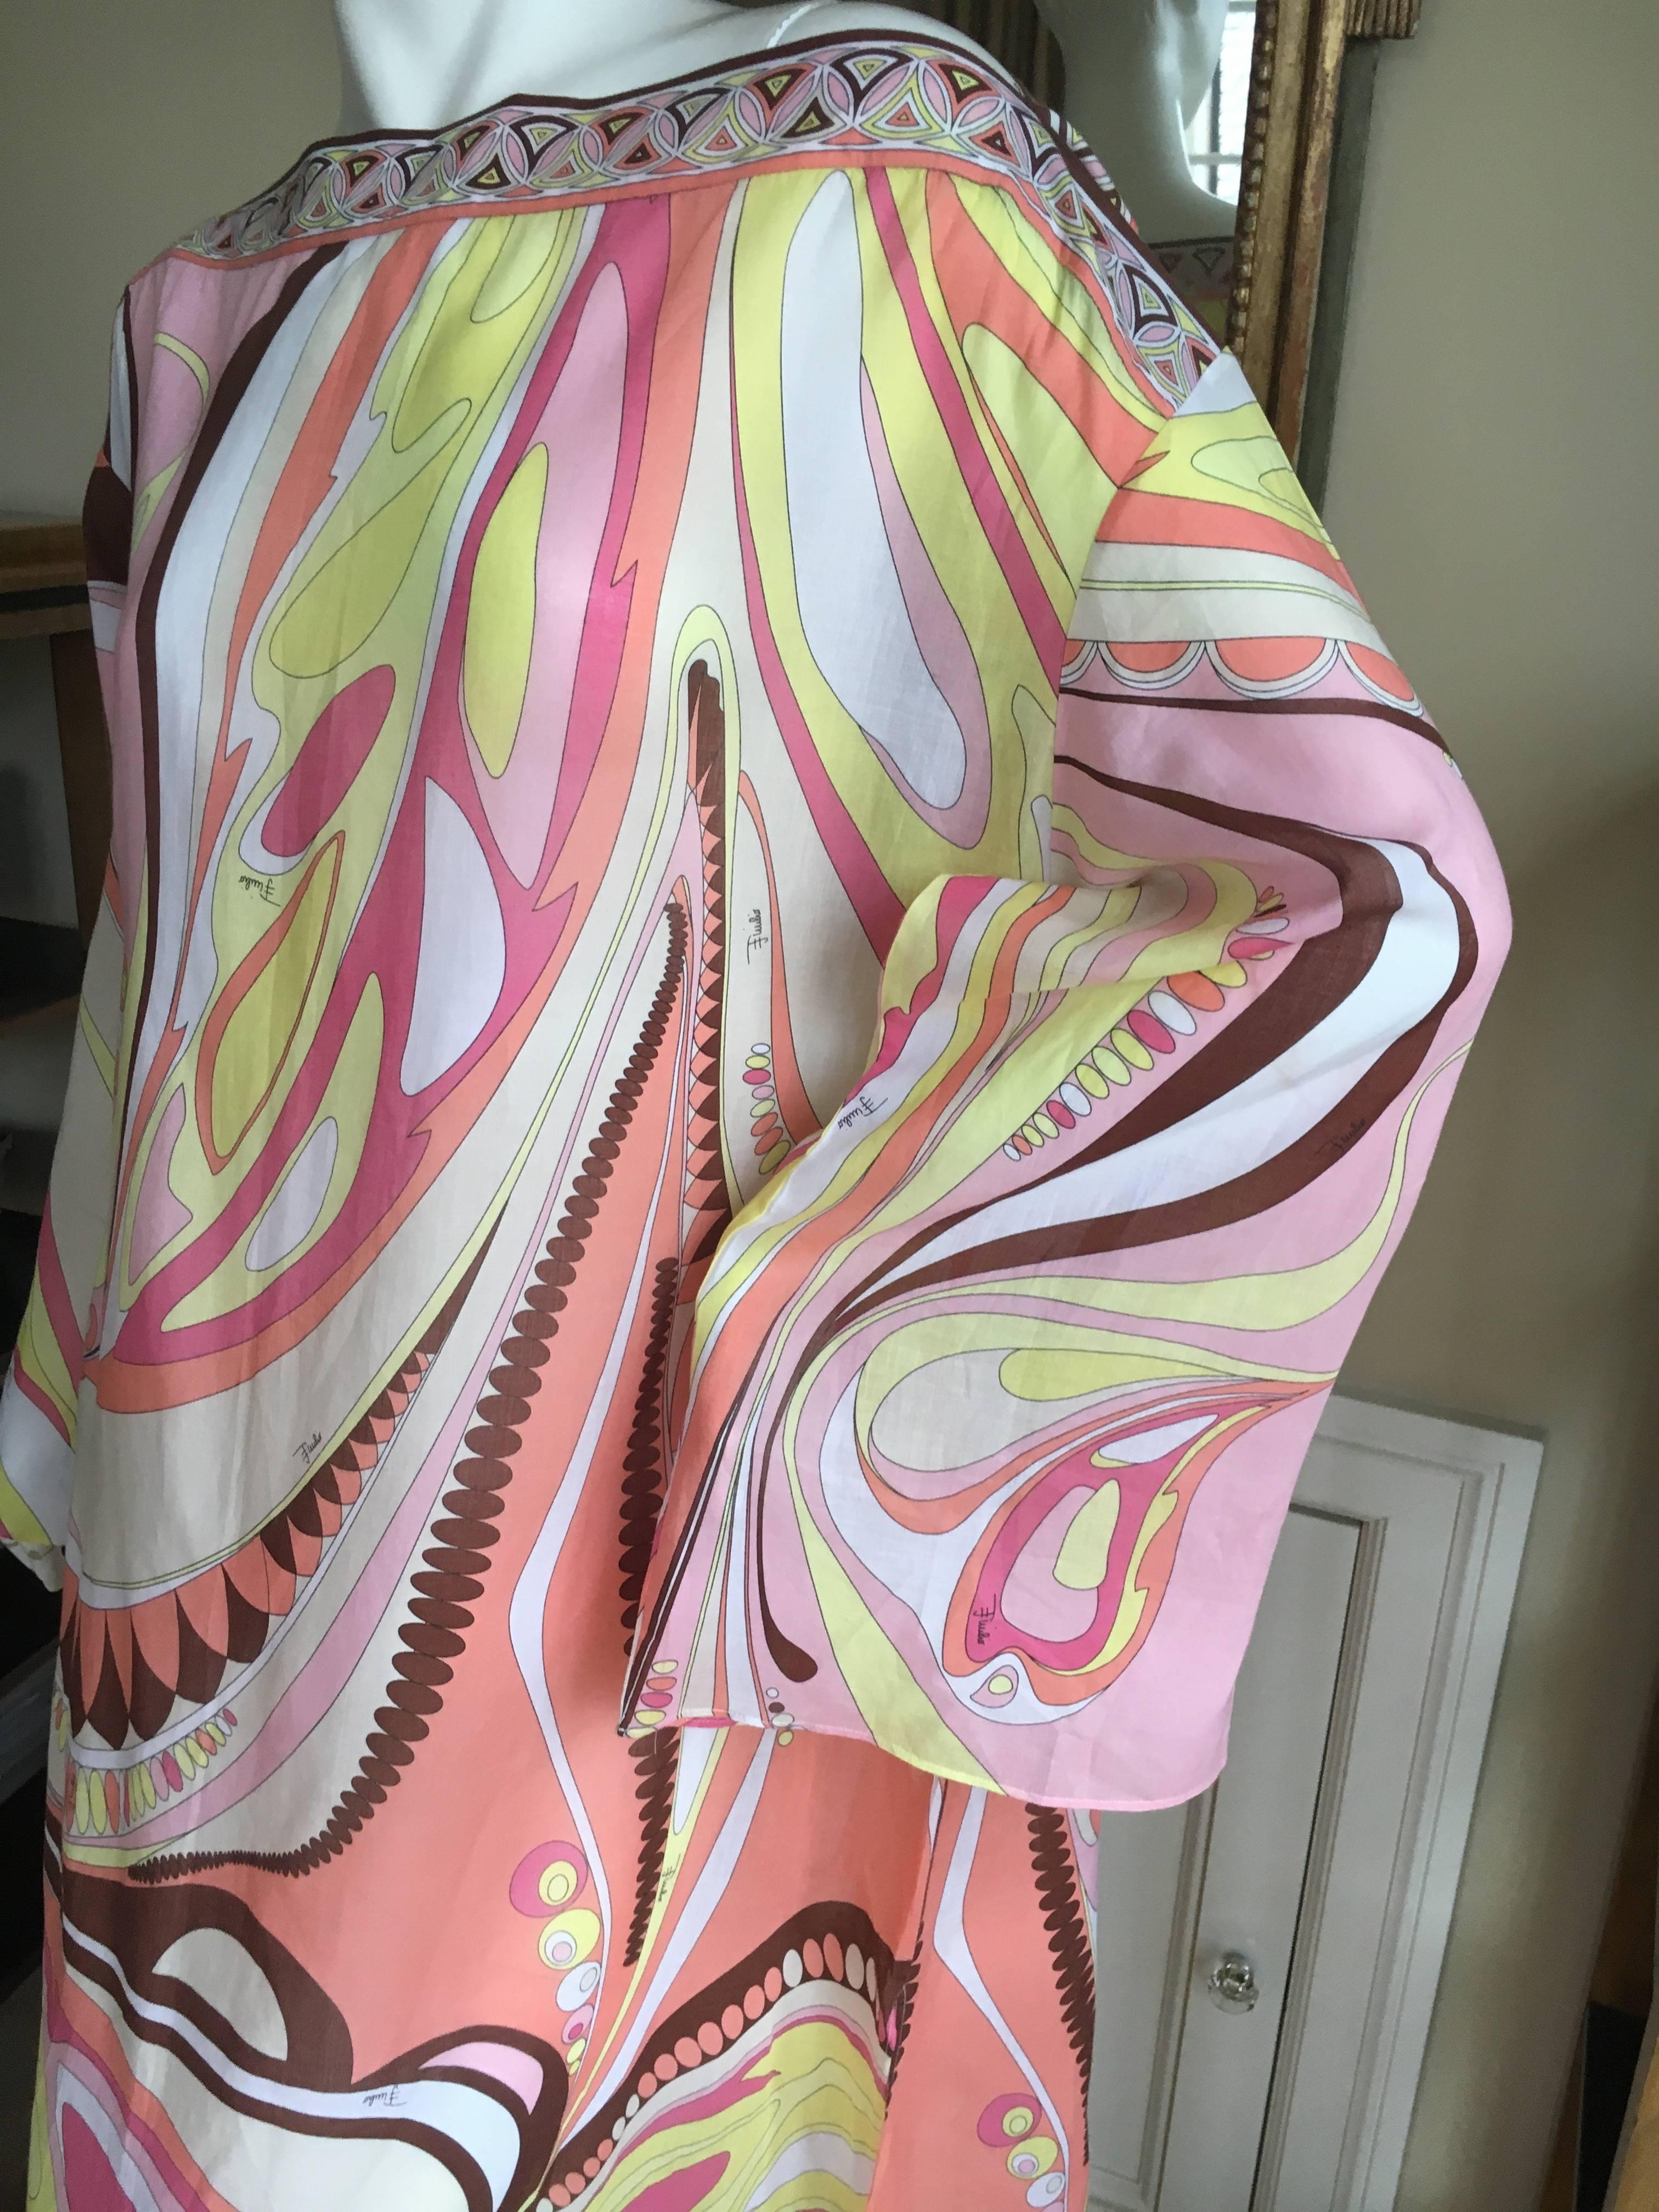 Wonderful sheer cotton Caftan , beach cover up from Emilio Pucci.
Featuring a bateau neckline and tow high side slits, this is perfect for pool or beach.
Large
Bust 46"
Waist 48"
Length 61"
New without tags